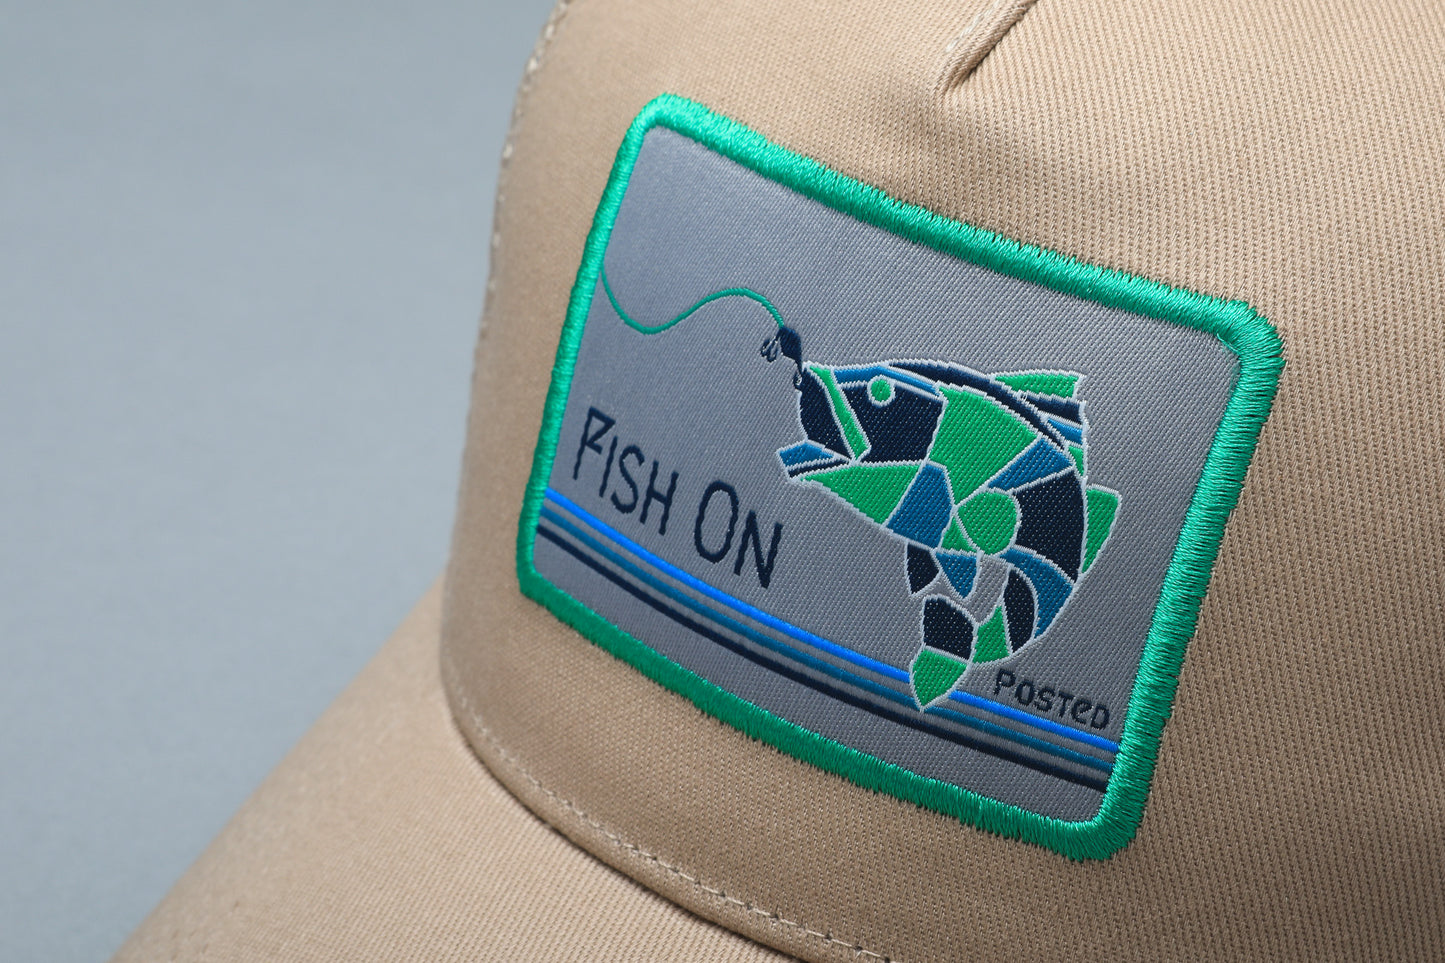 Fishing hat: Fish on – Posted